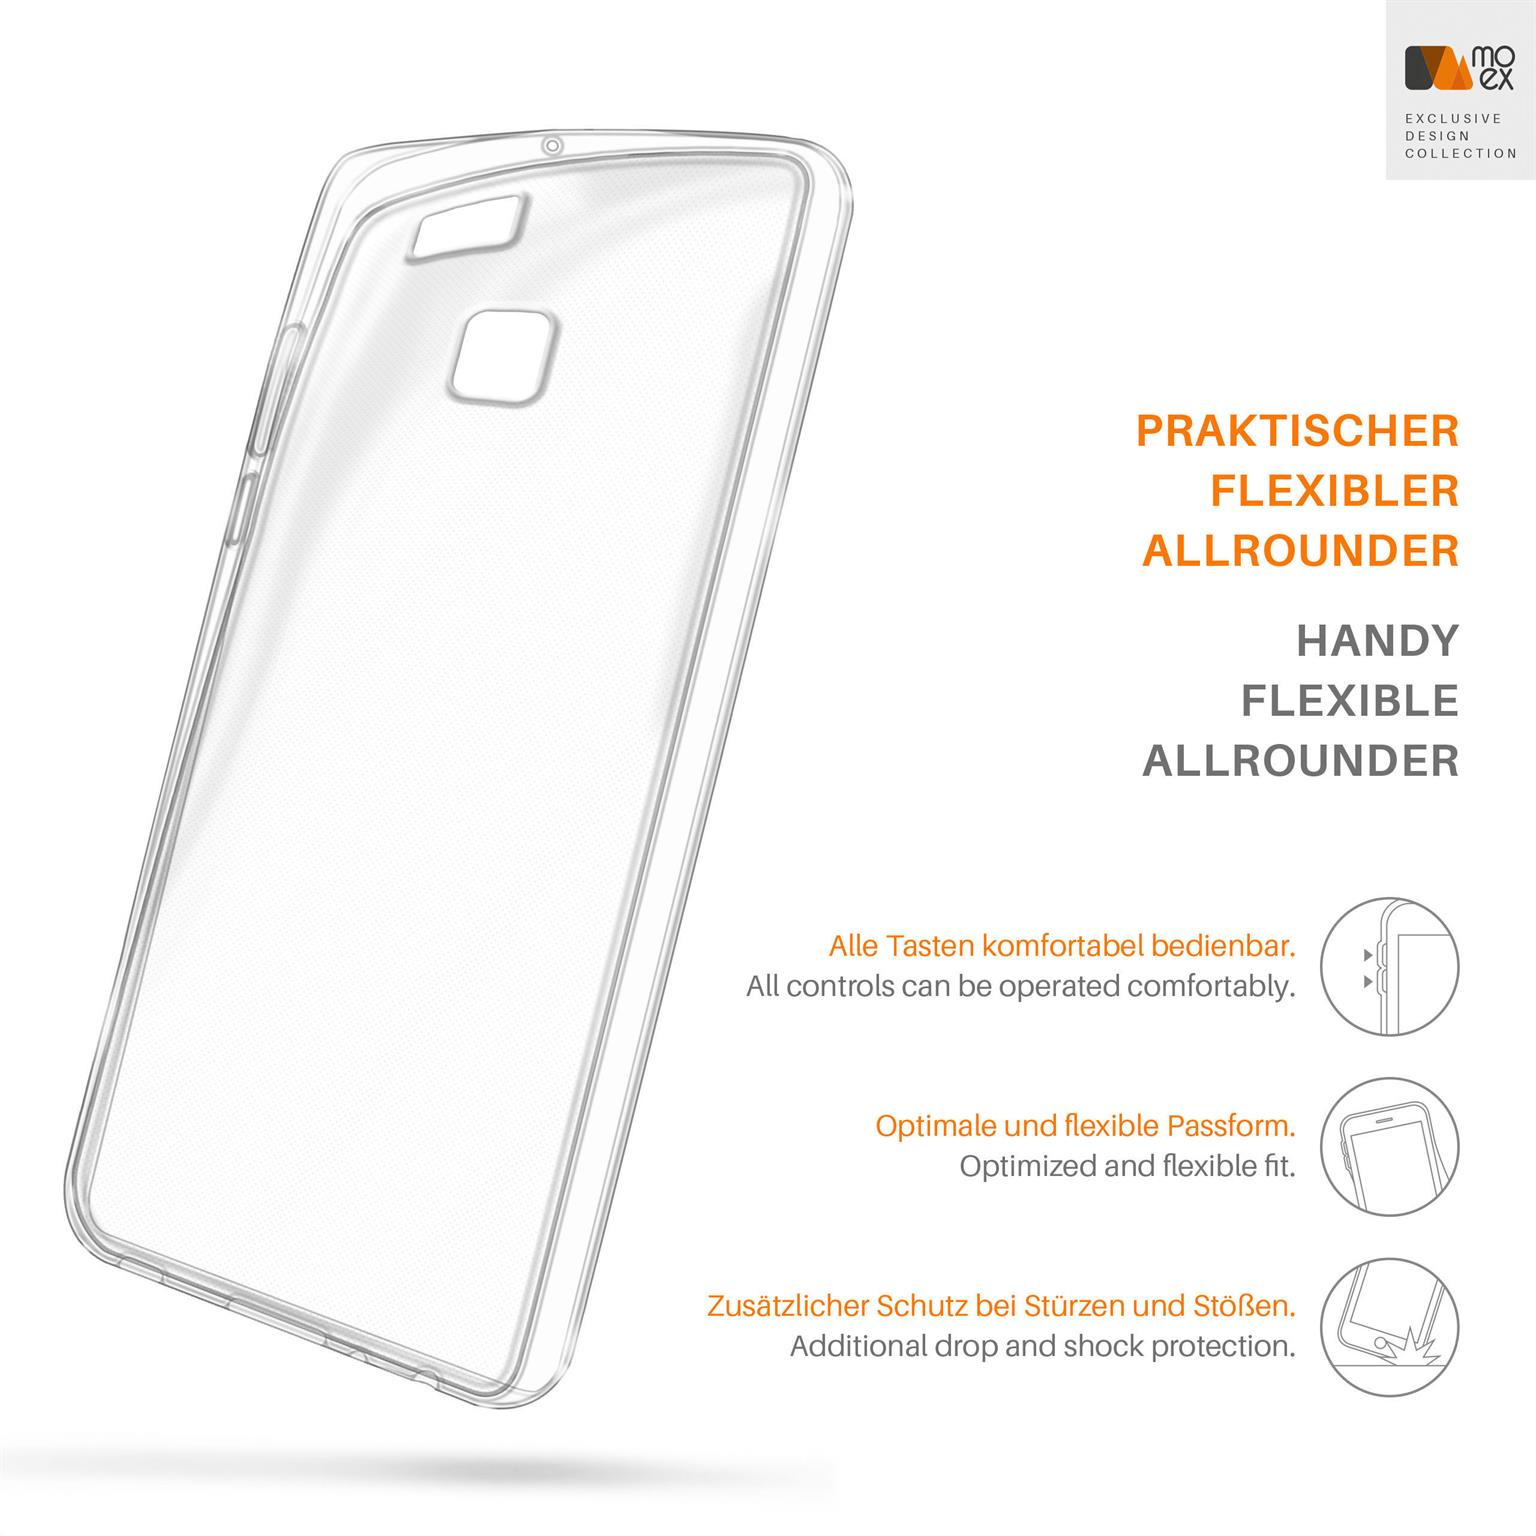 MOEX Aero Case, Crystal-Clear P9 Huawei, Lite, Backcover